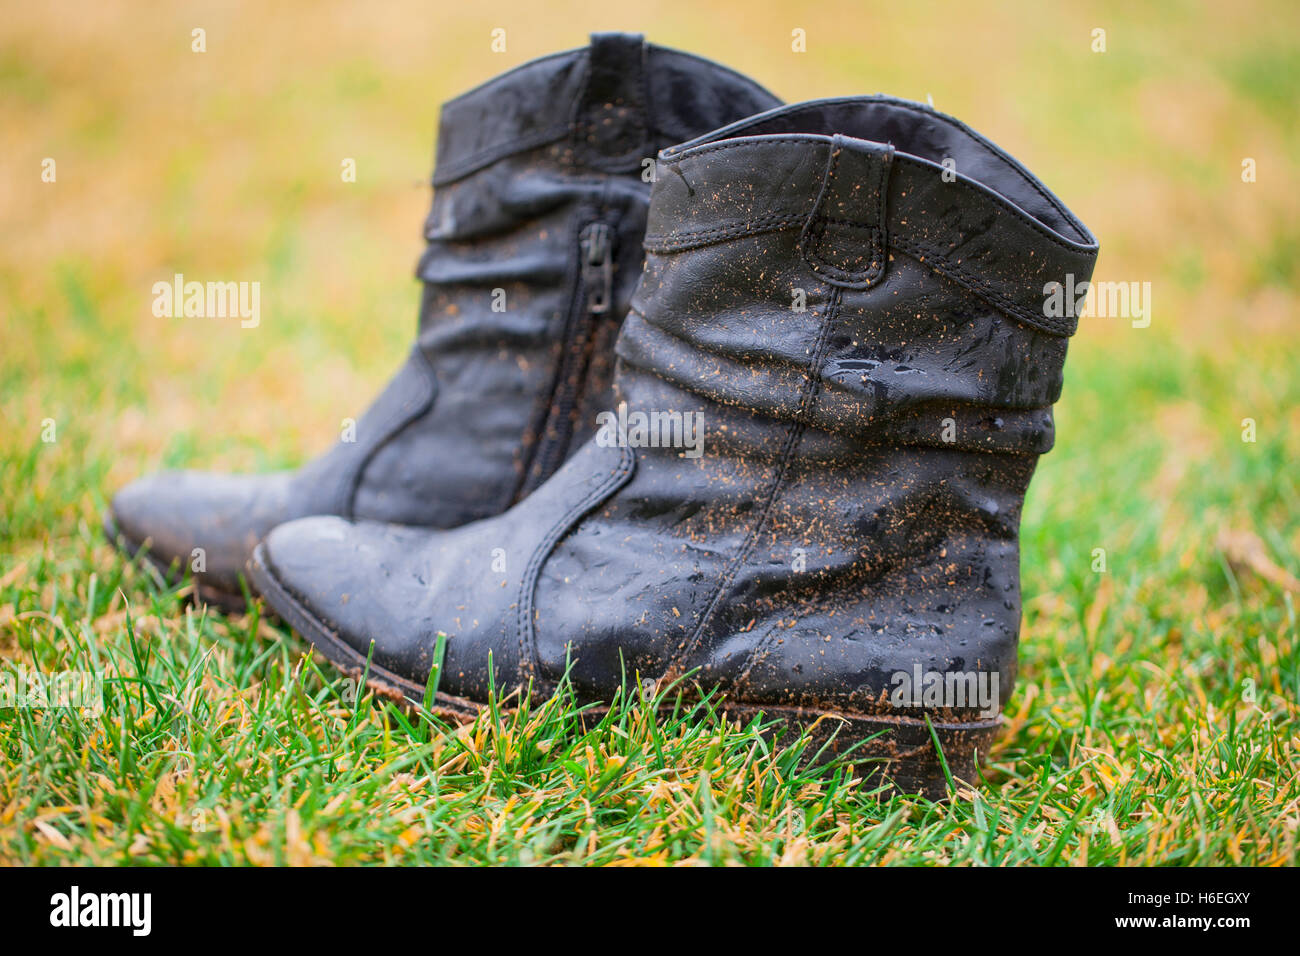 Muddy Cowgirl Boots Stock Photo